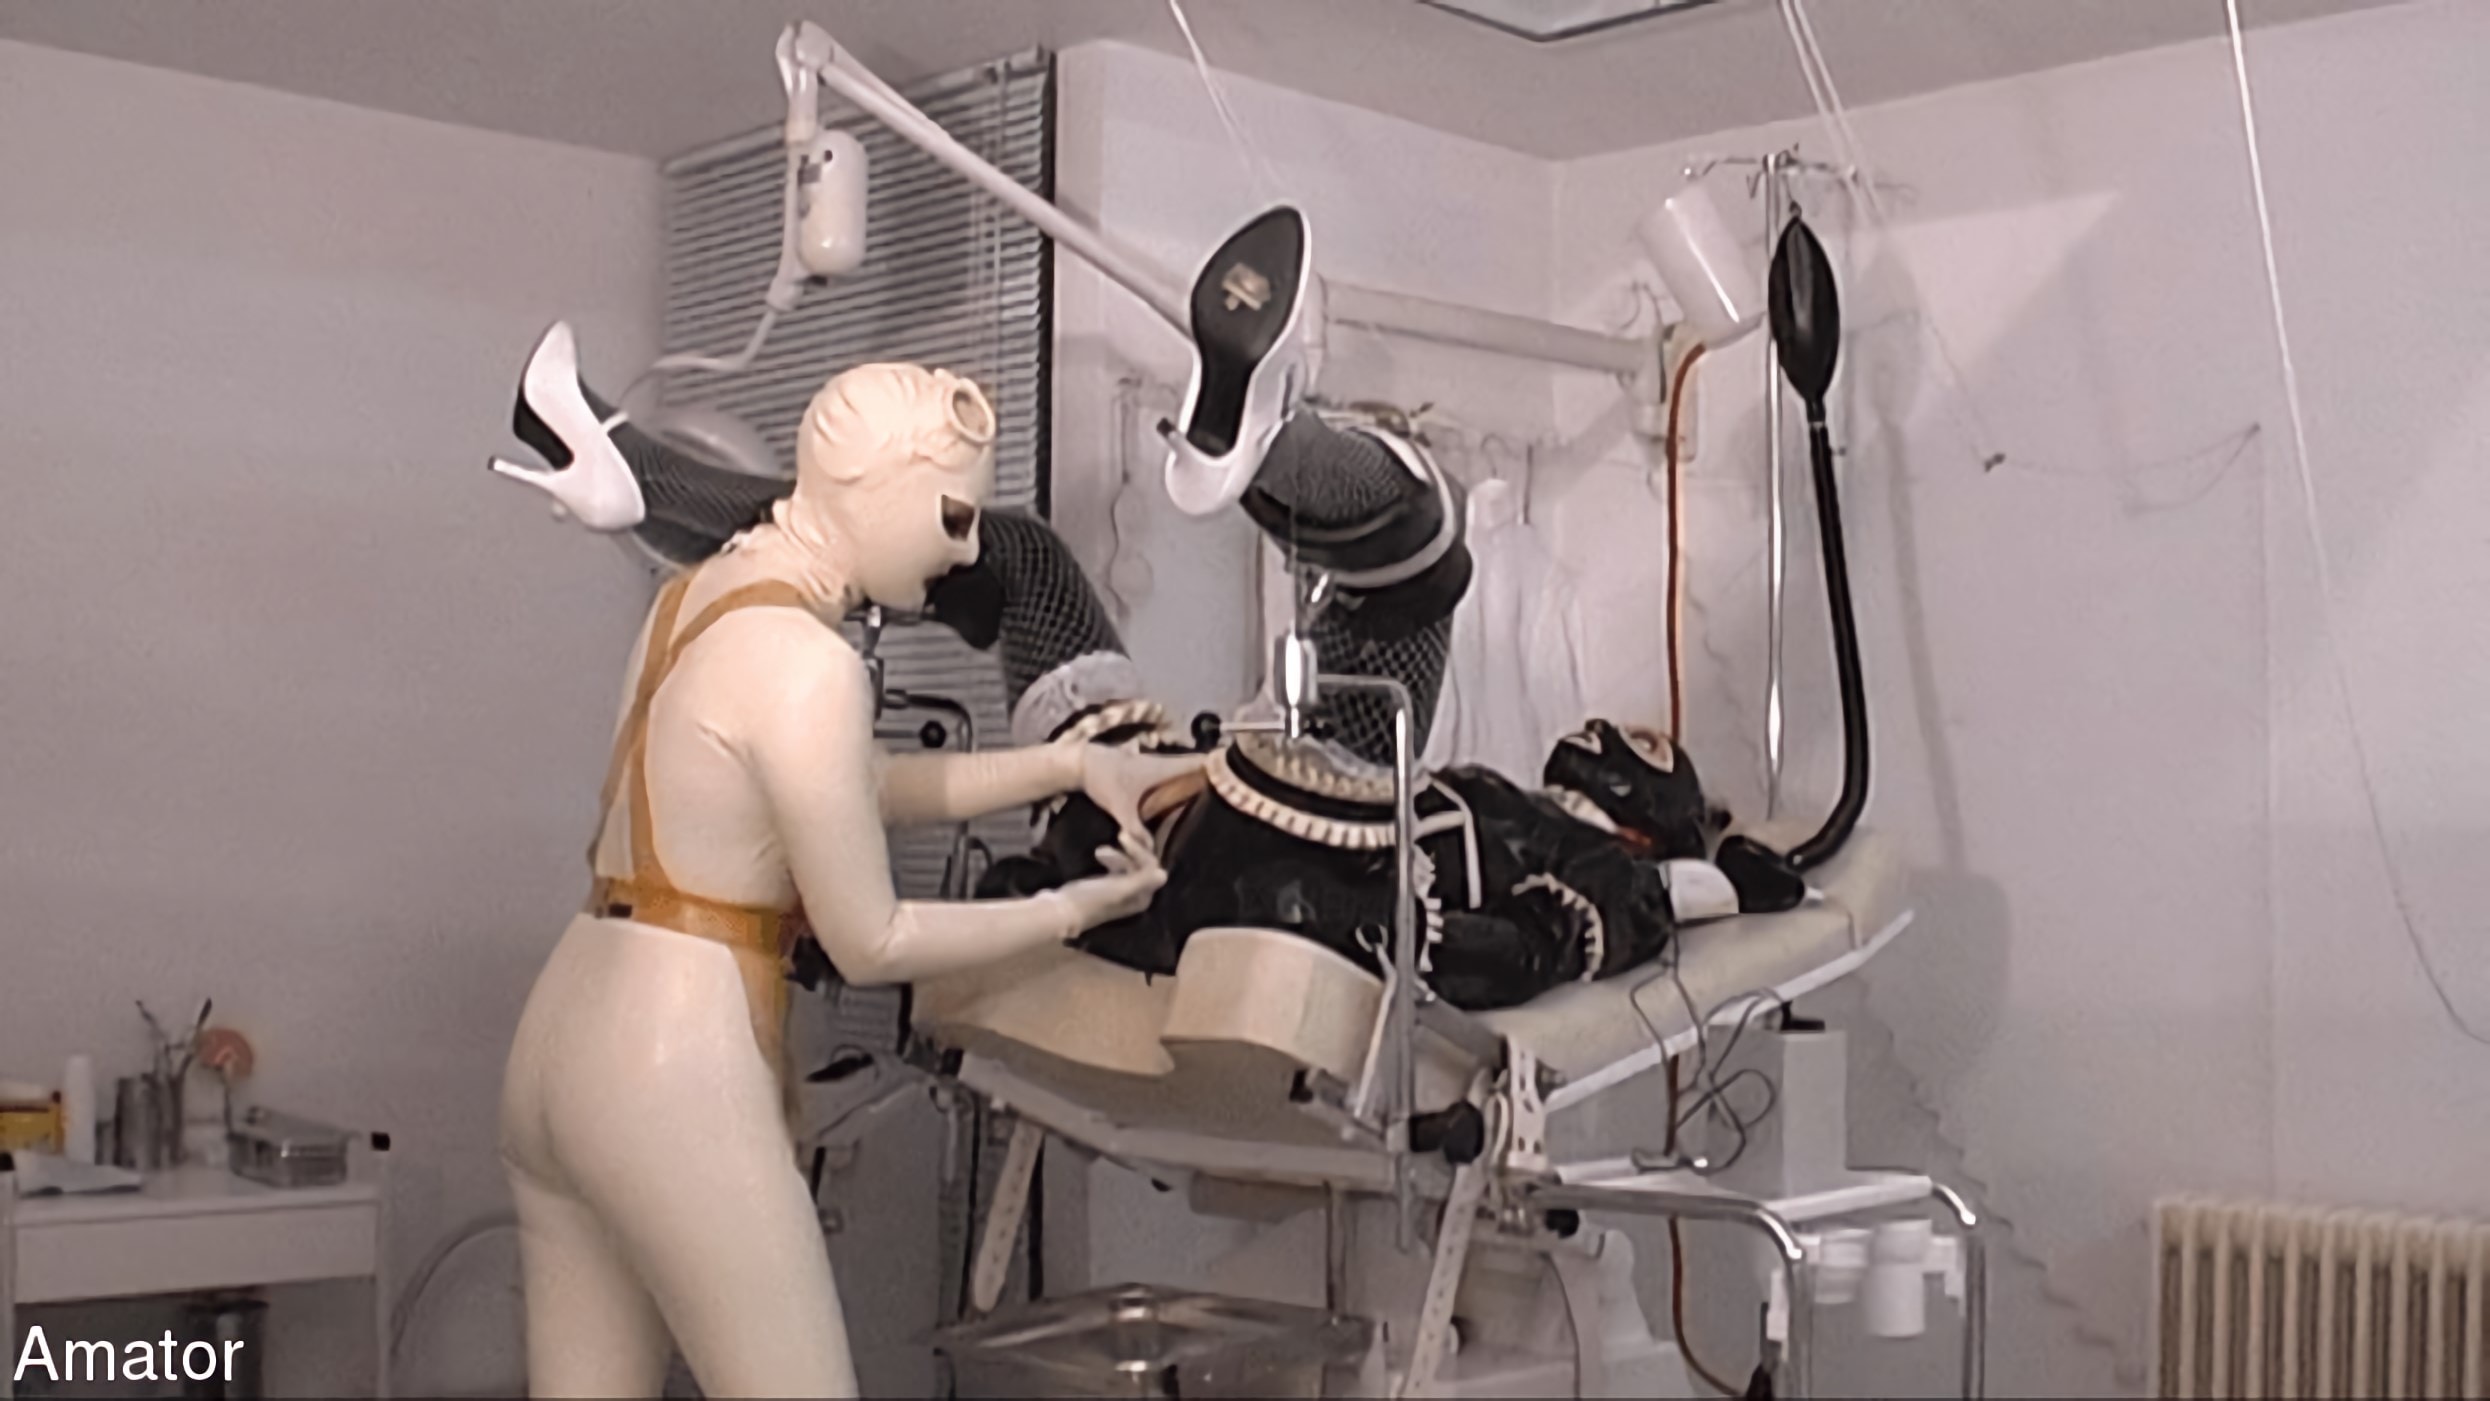 Kink Partners 'The rubber maid in the clinic part 1' starring Sklave (Photo 6)